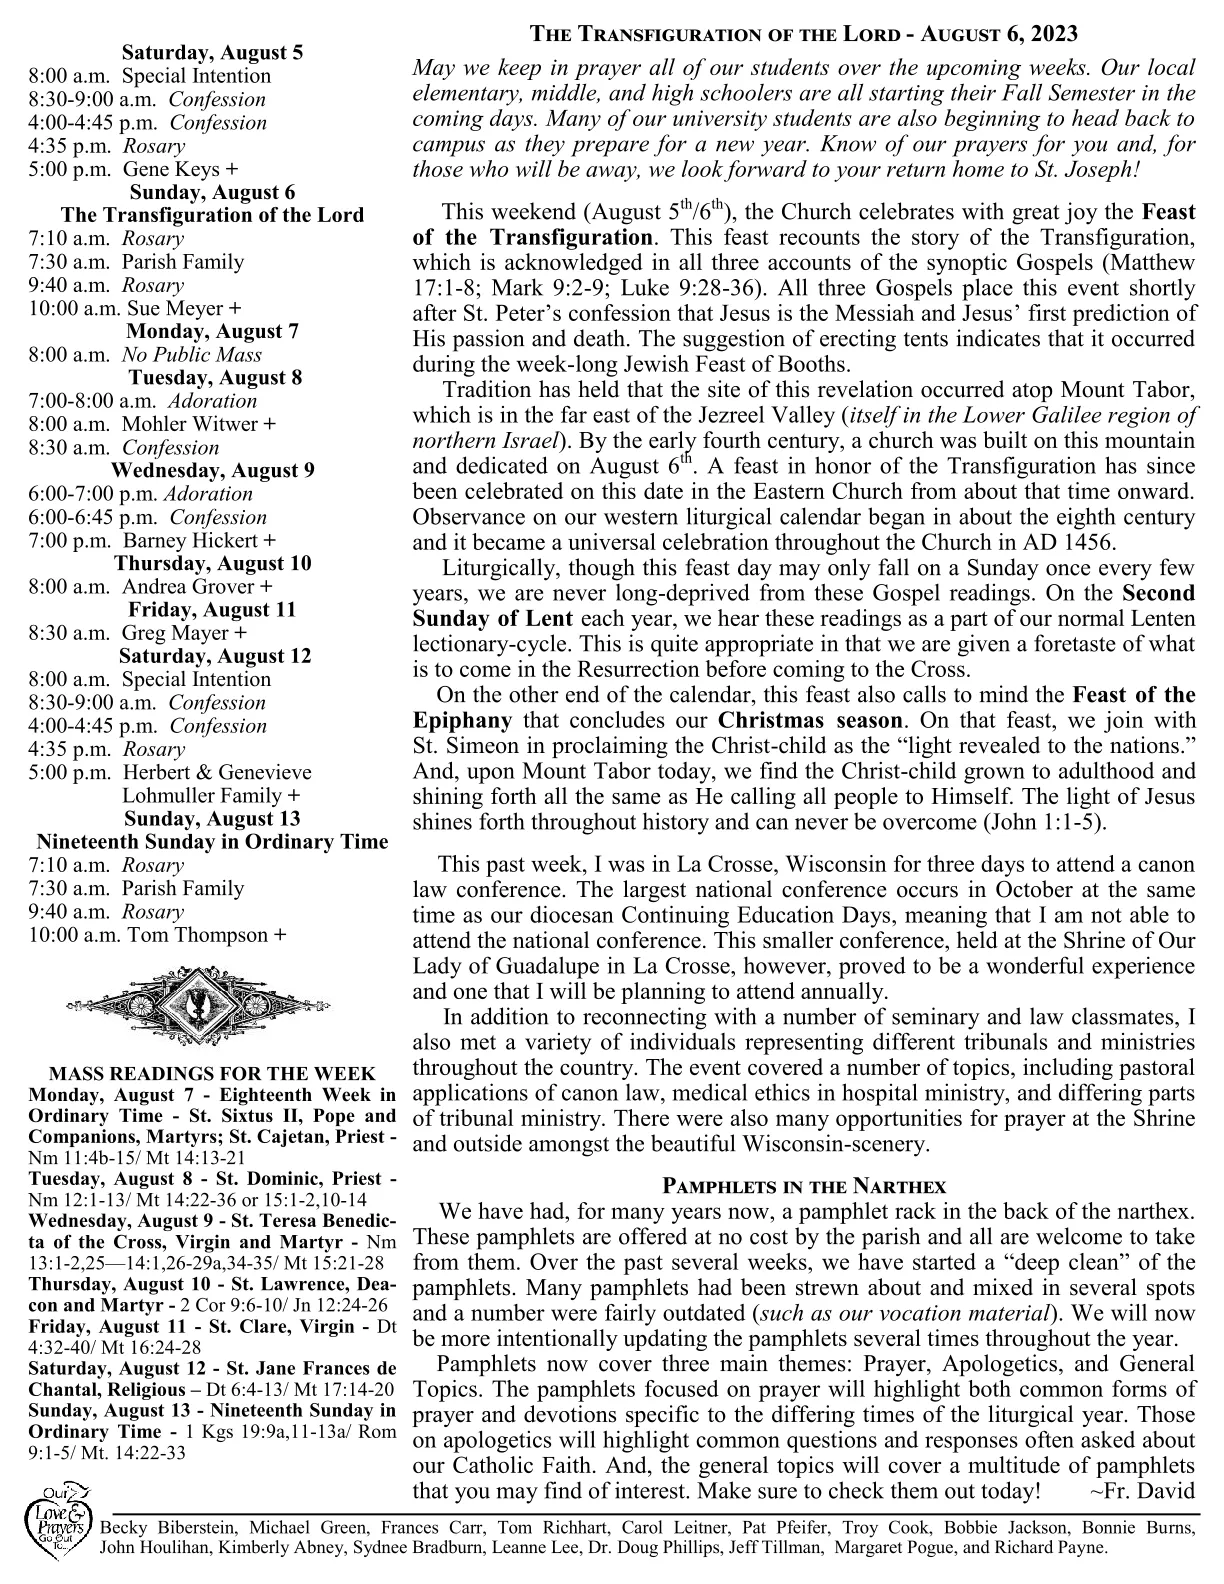 Aug 06, 2023 - Bulletin - Page 2